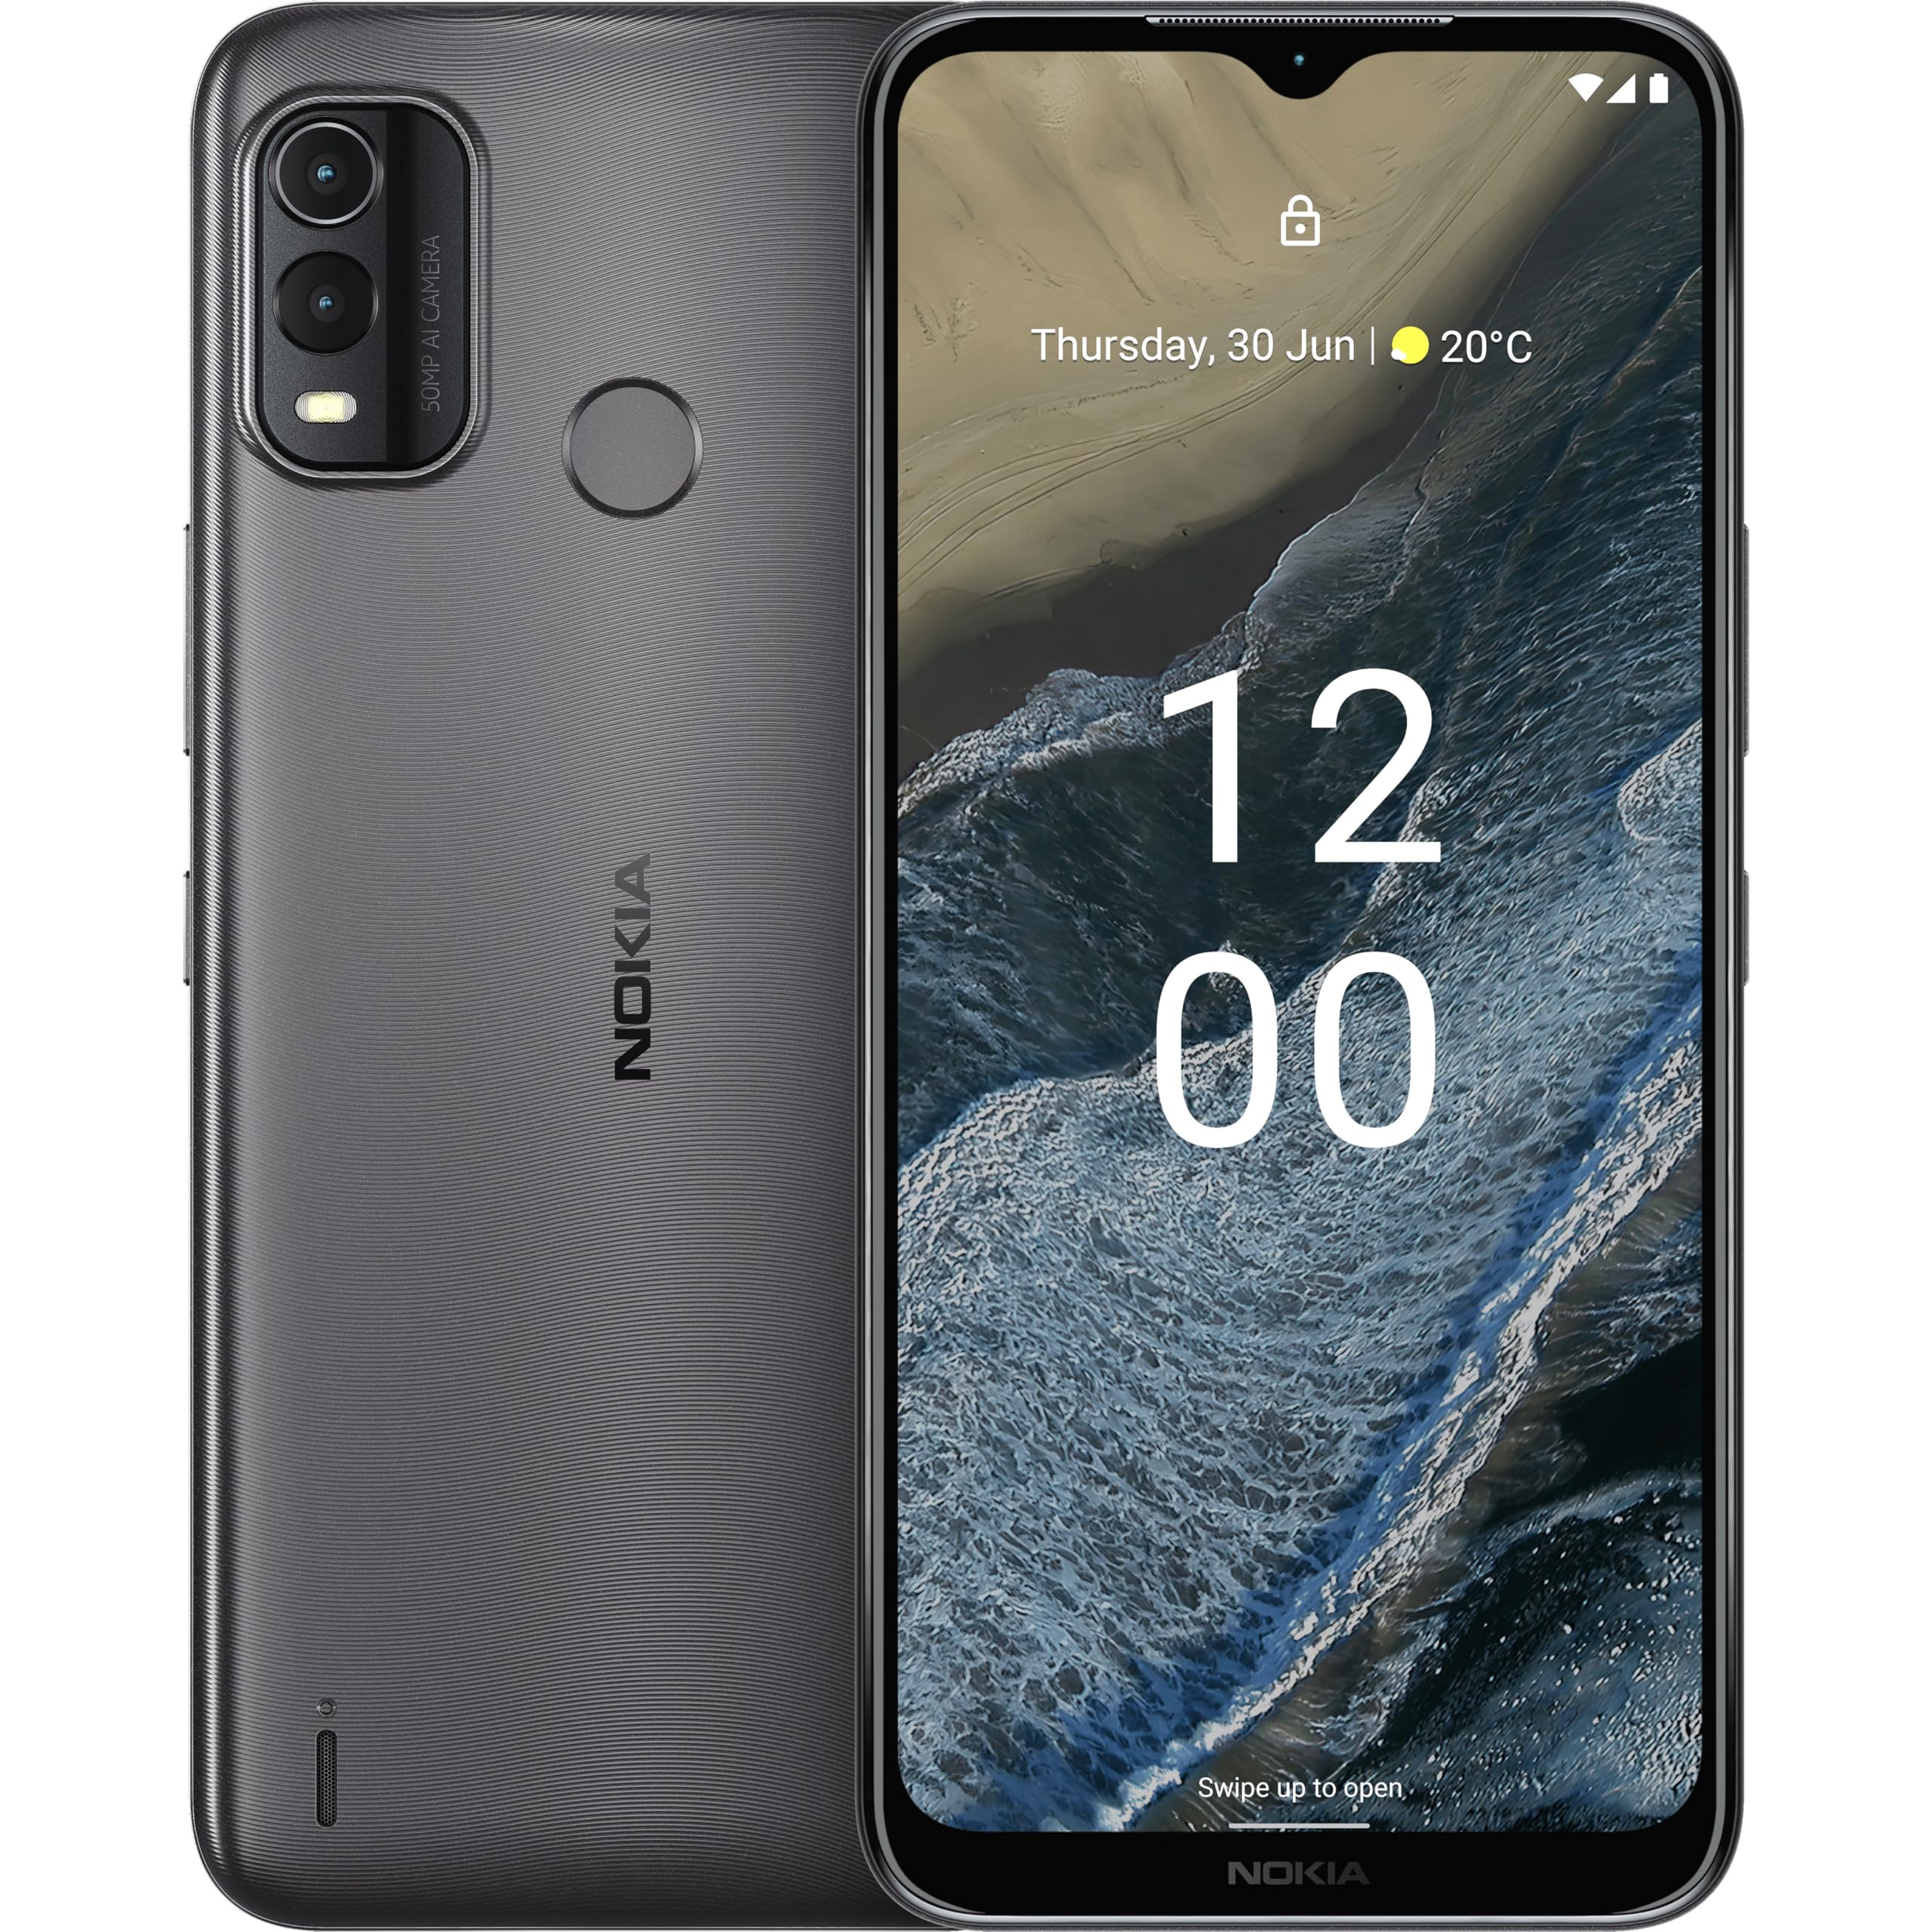 Nokia G11 Plus | Android 12 | Dual SIM | 3-Day Battery | 50MP Camera | 3/64GB | 6.52-Inch Screen | Dual Band WiFi | Unlocked GSM Smartphone | Not Compatible with Verizon or AT&T | Charcoal